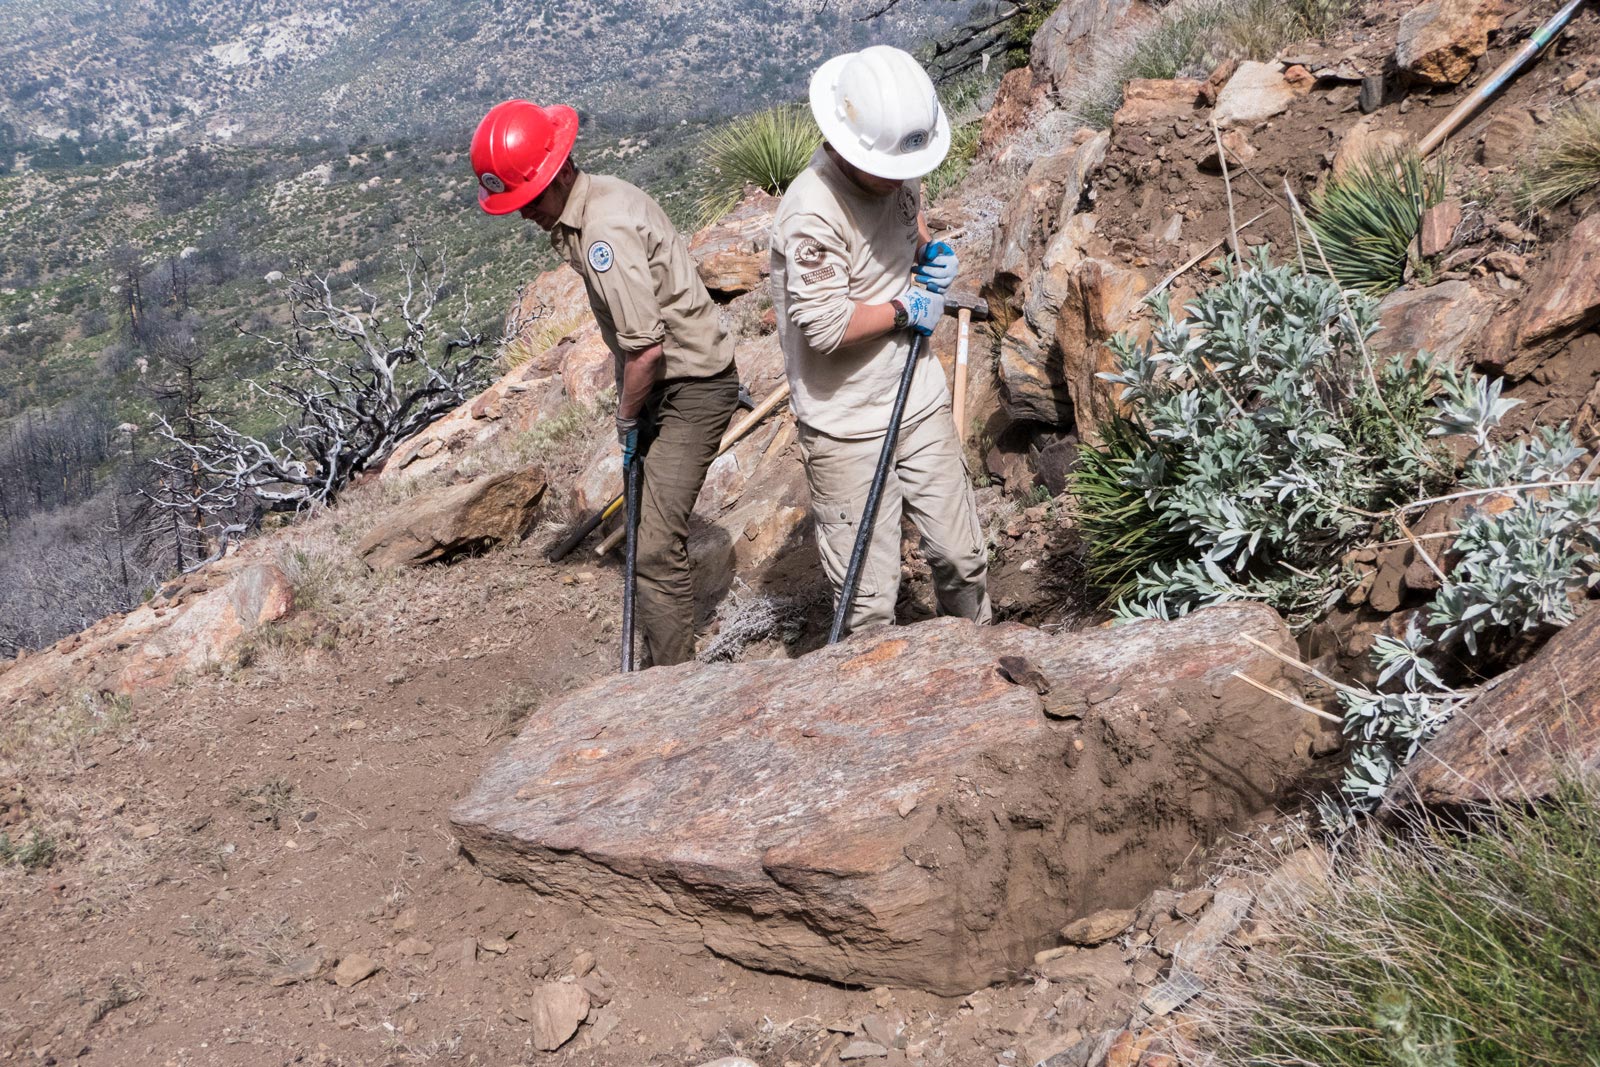 ACE crew members move a big boulder in the Mountain Fire burn area.